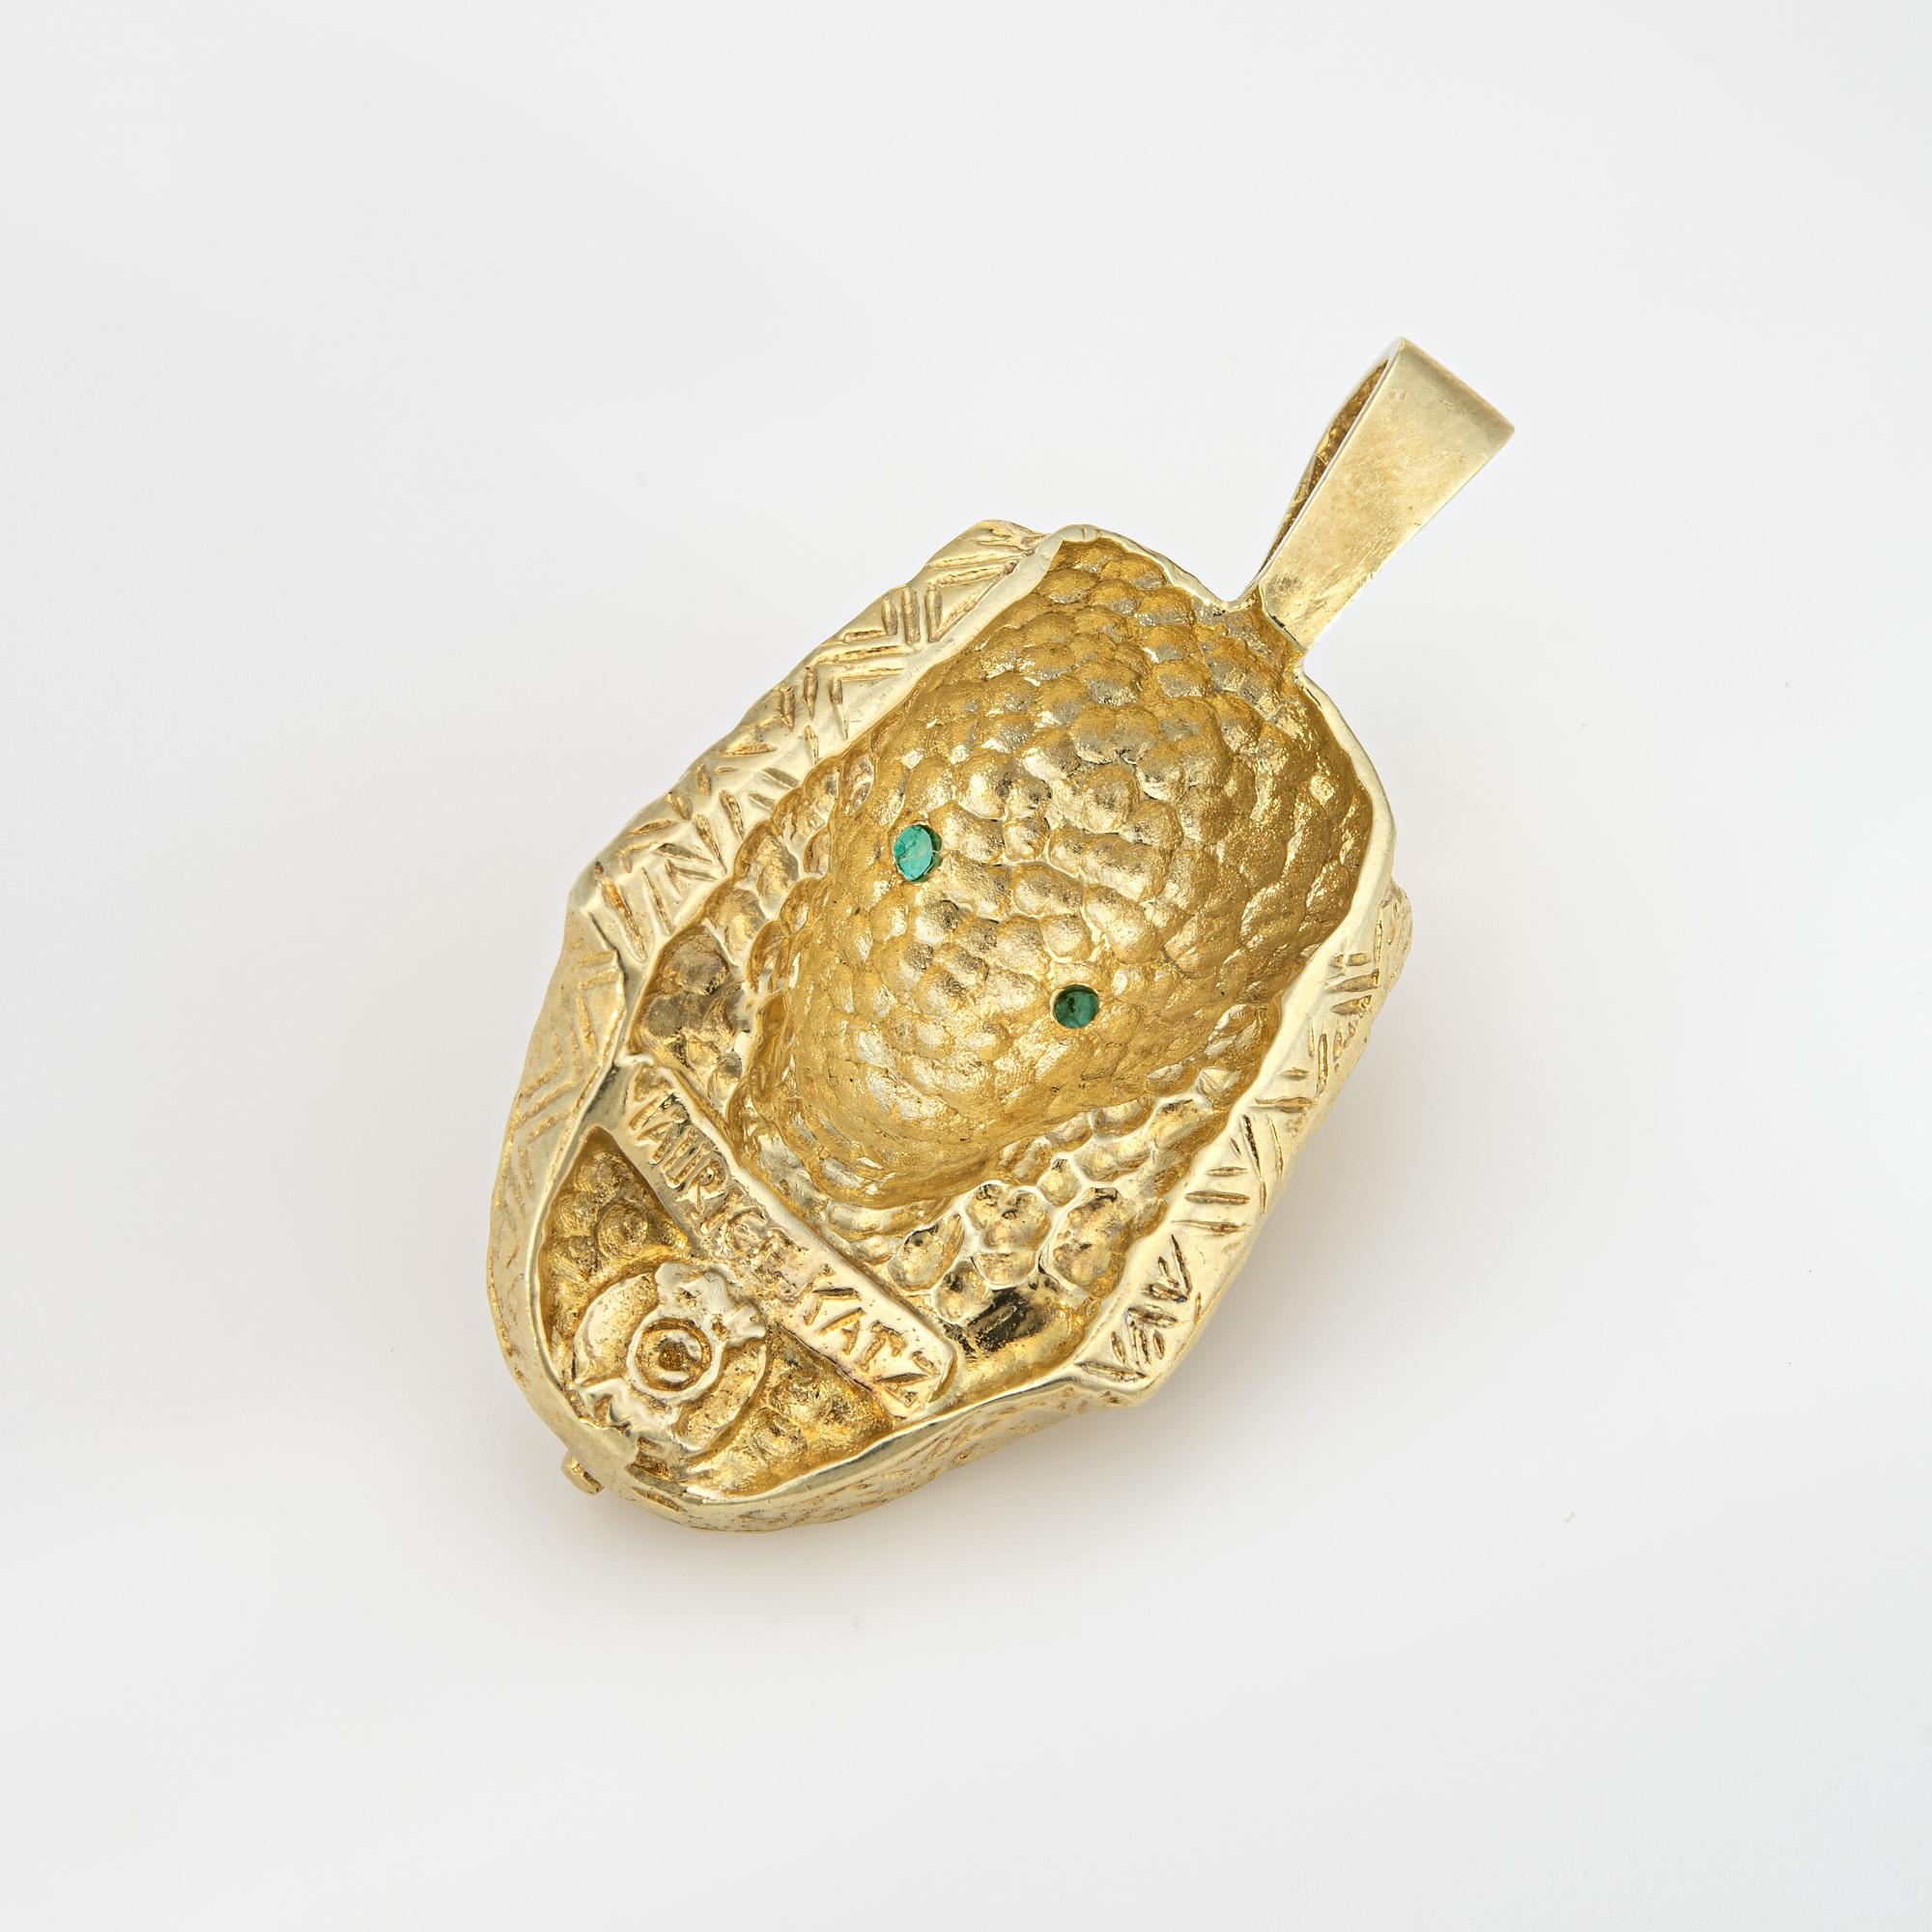 Finely detailed vintage Maurice Katz Egyptian Pharaoh pendant crafted in 14 karat yellow gold. 

Two small emeralds are set into the eyes and total an estimated 0.04 carats. 

The beautifully detailed pendant highlights the intricate craftsmanship